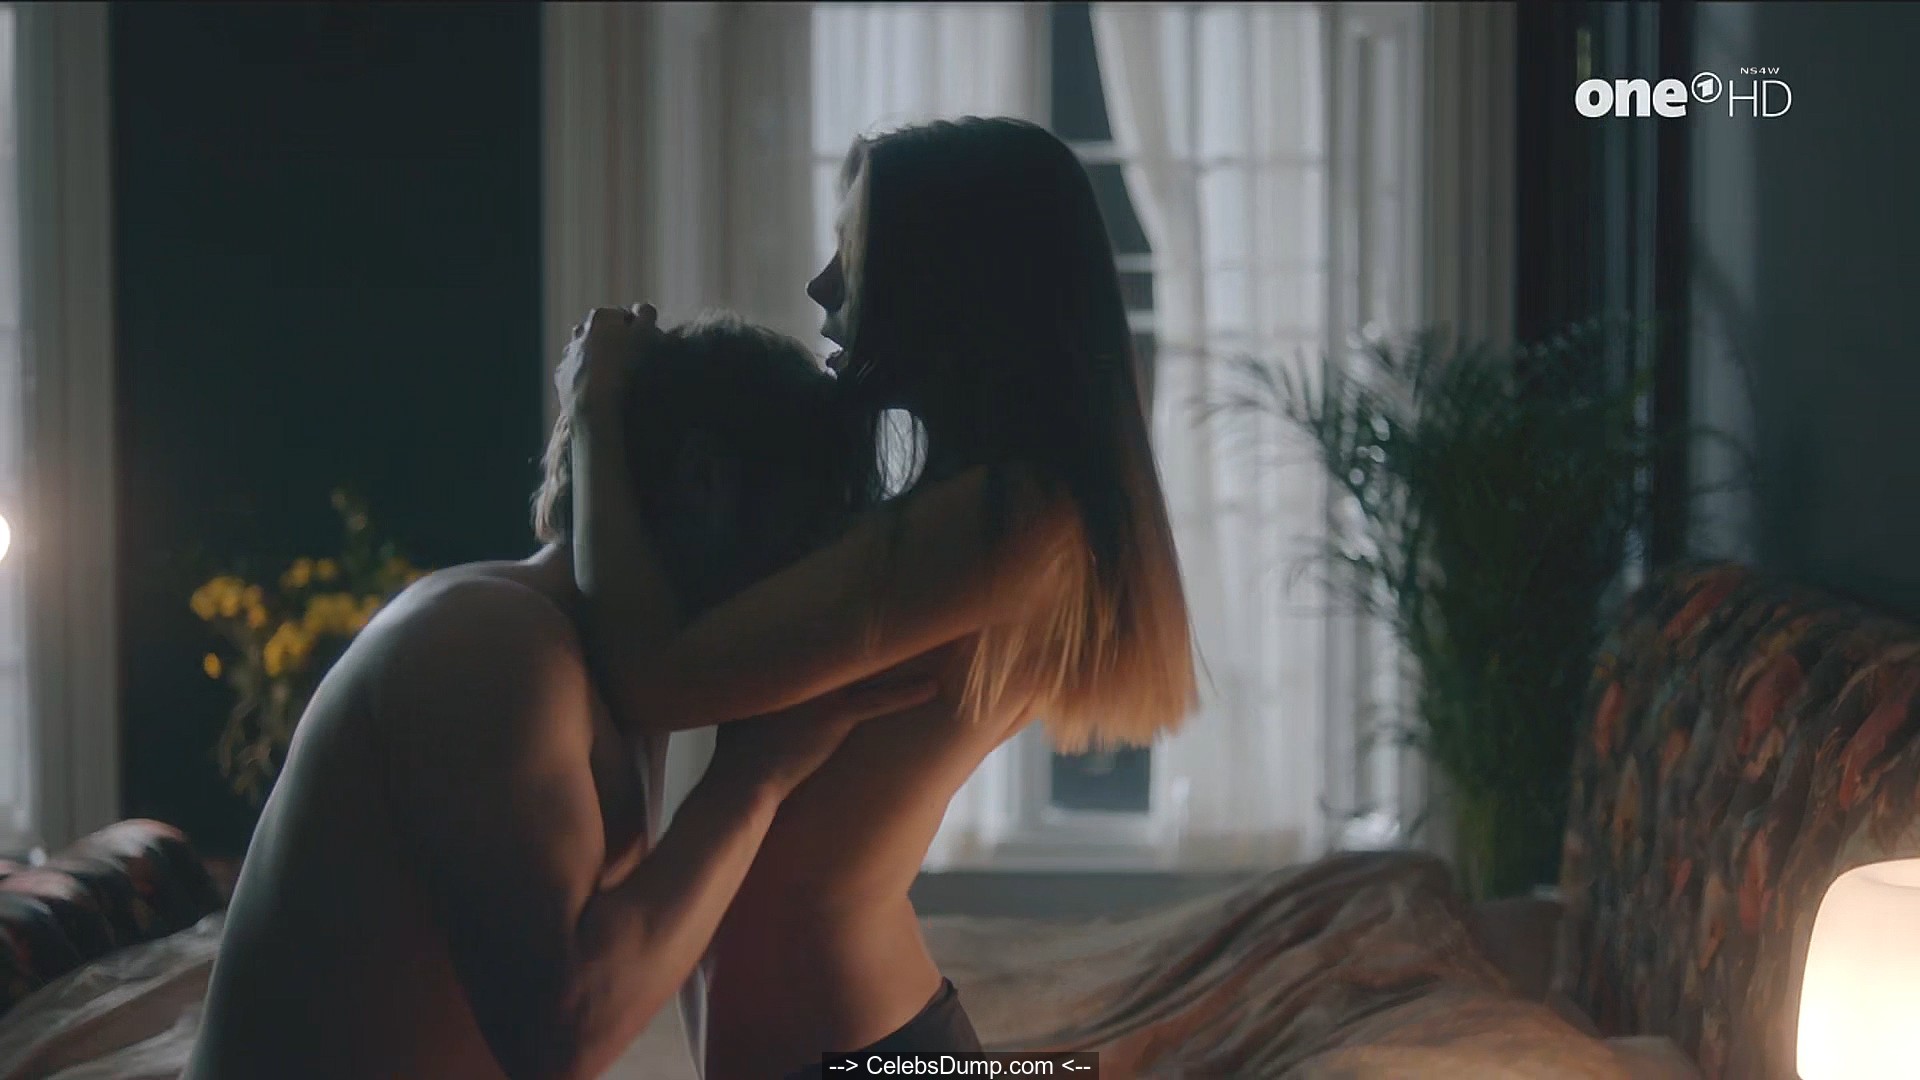 Synnove Karlsen nude in sex scenes from Clique S01 E03 (2017) .